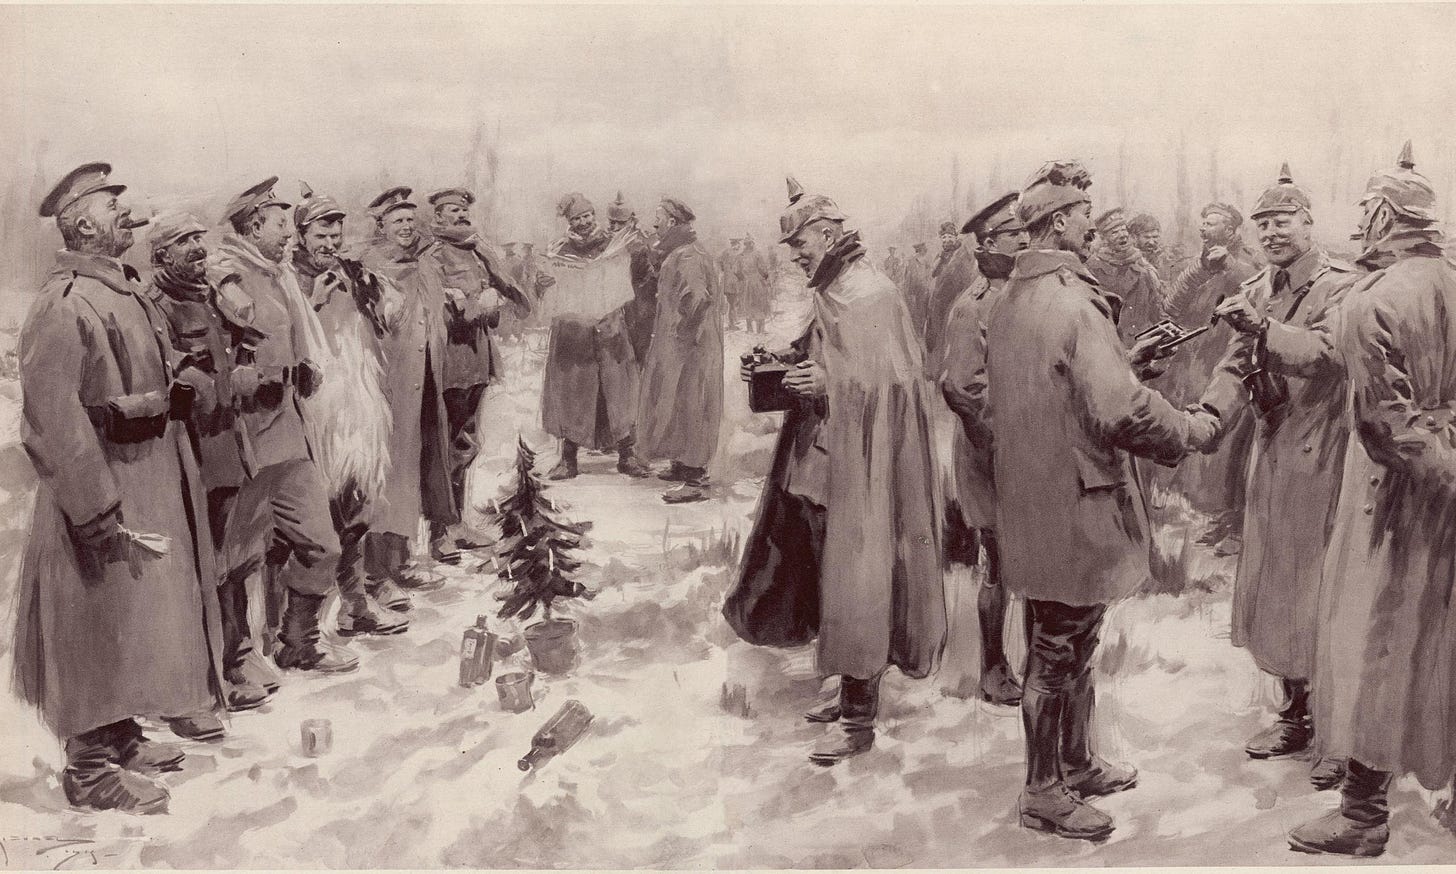 ww1 soldiers meeting in no-man's land to gather around a tiny christmas tree